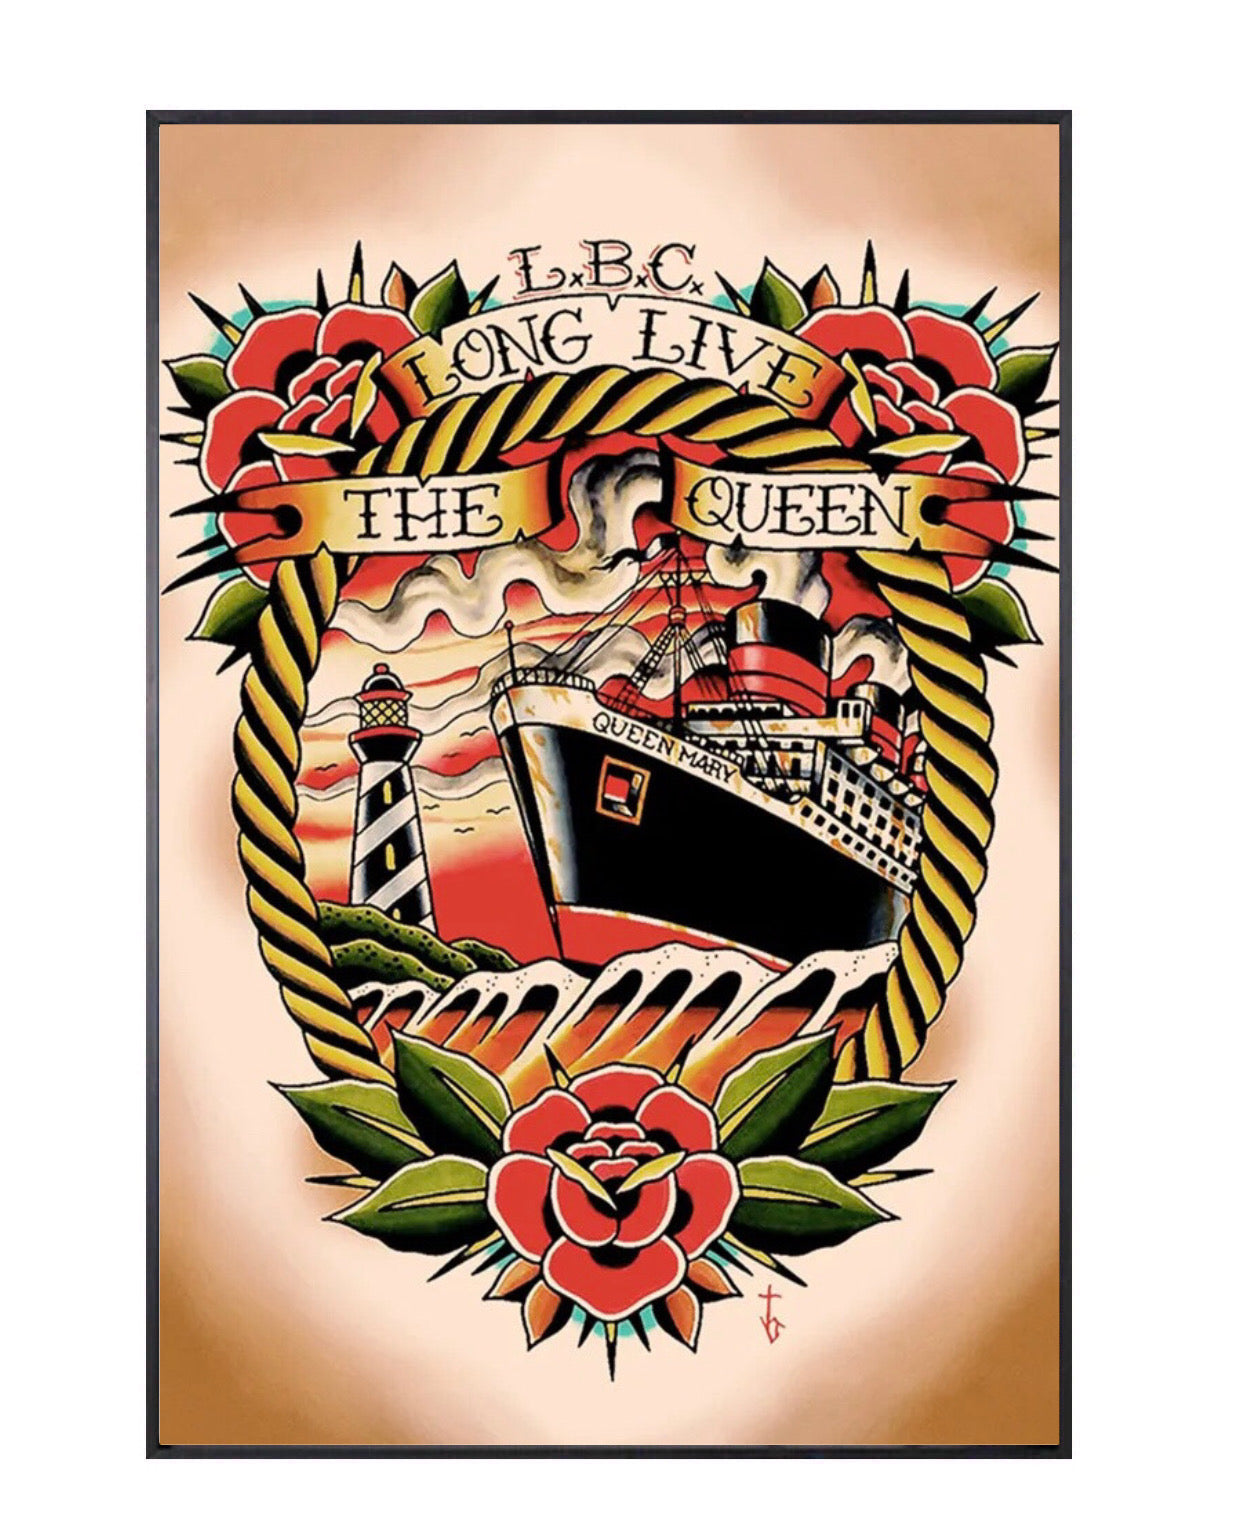 "l.b.c. long live the queen" tattoo poster